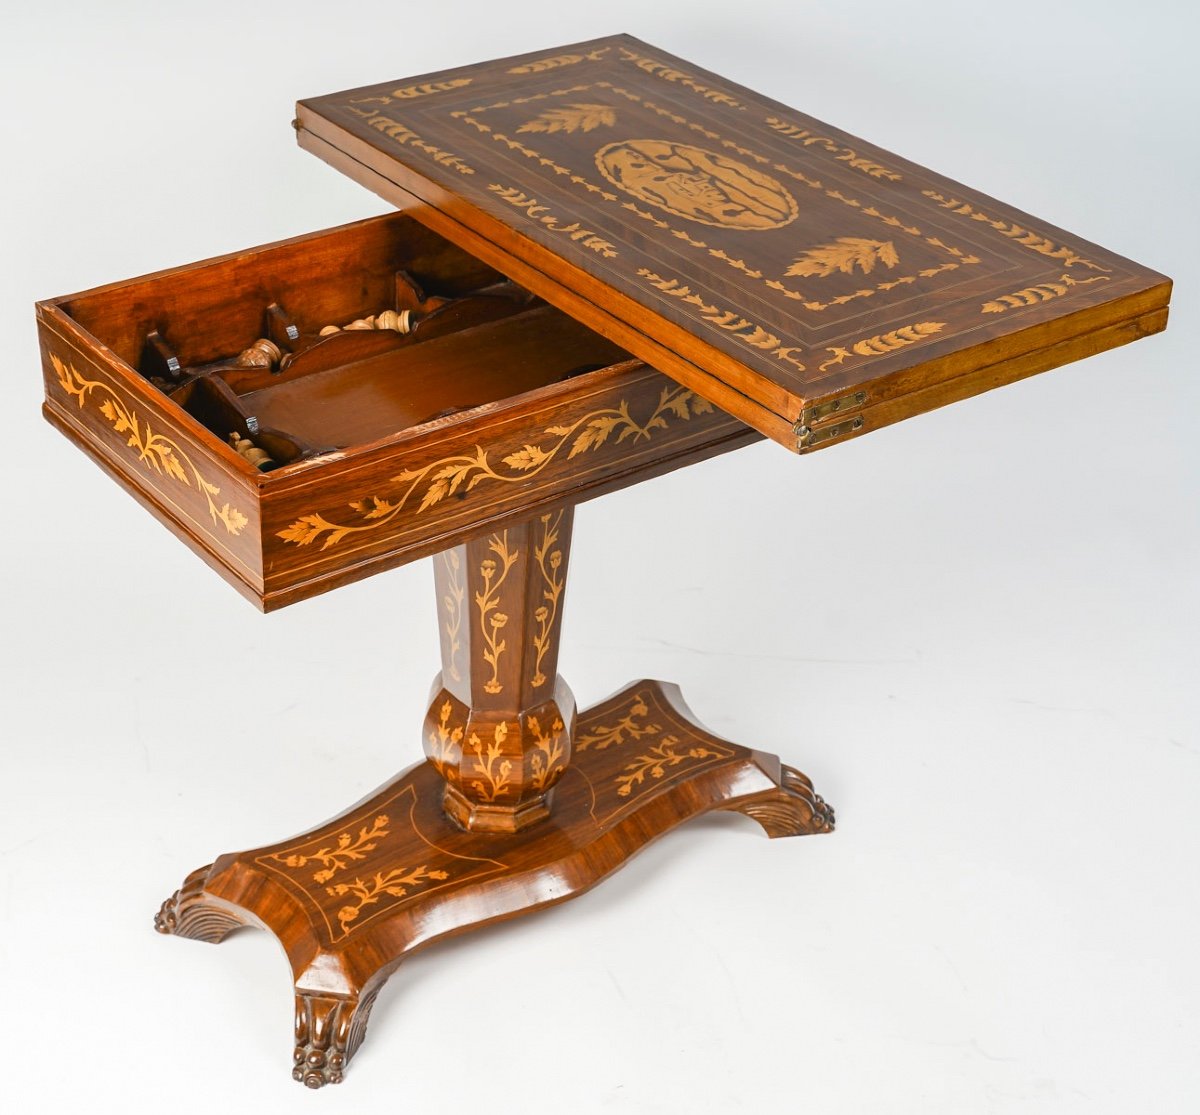 Chessboard, Backgammon Table, Games Table In Wood Marquetry, Early 20th Century.-photo-1